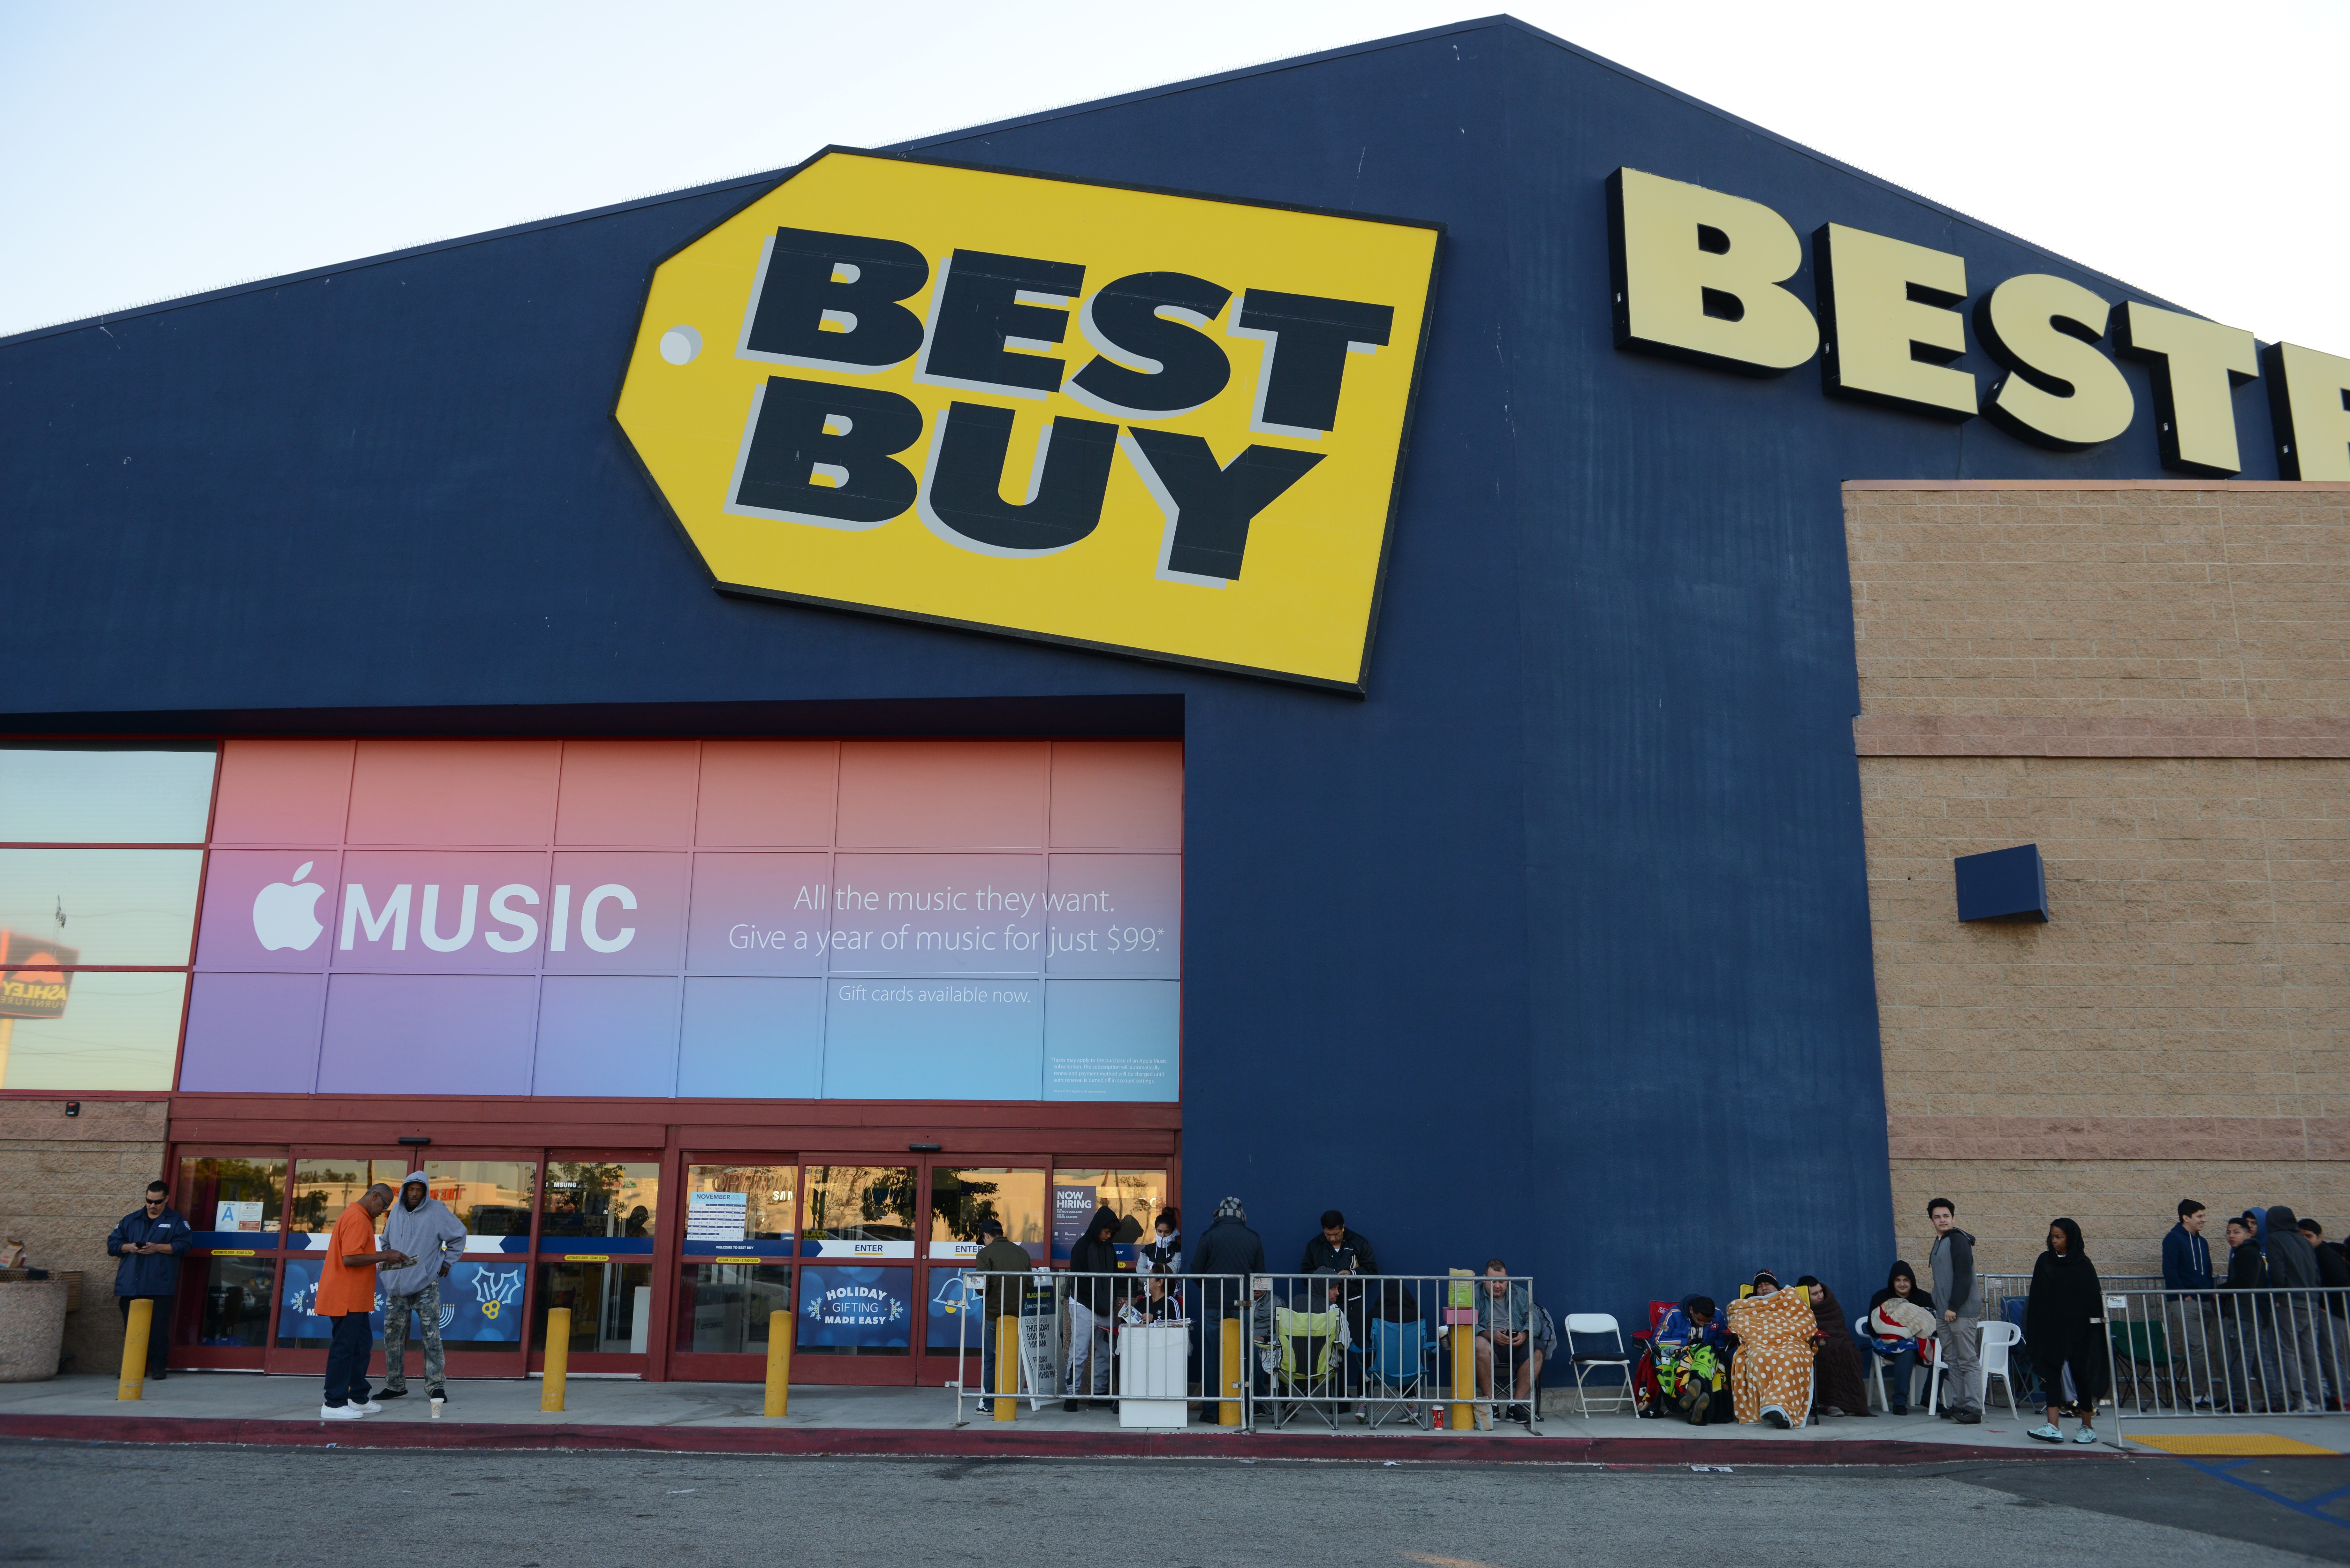 Is Best Buy open on Christmas Eve and Christmas Day?